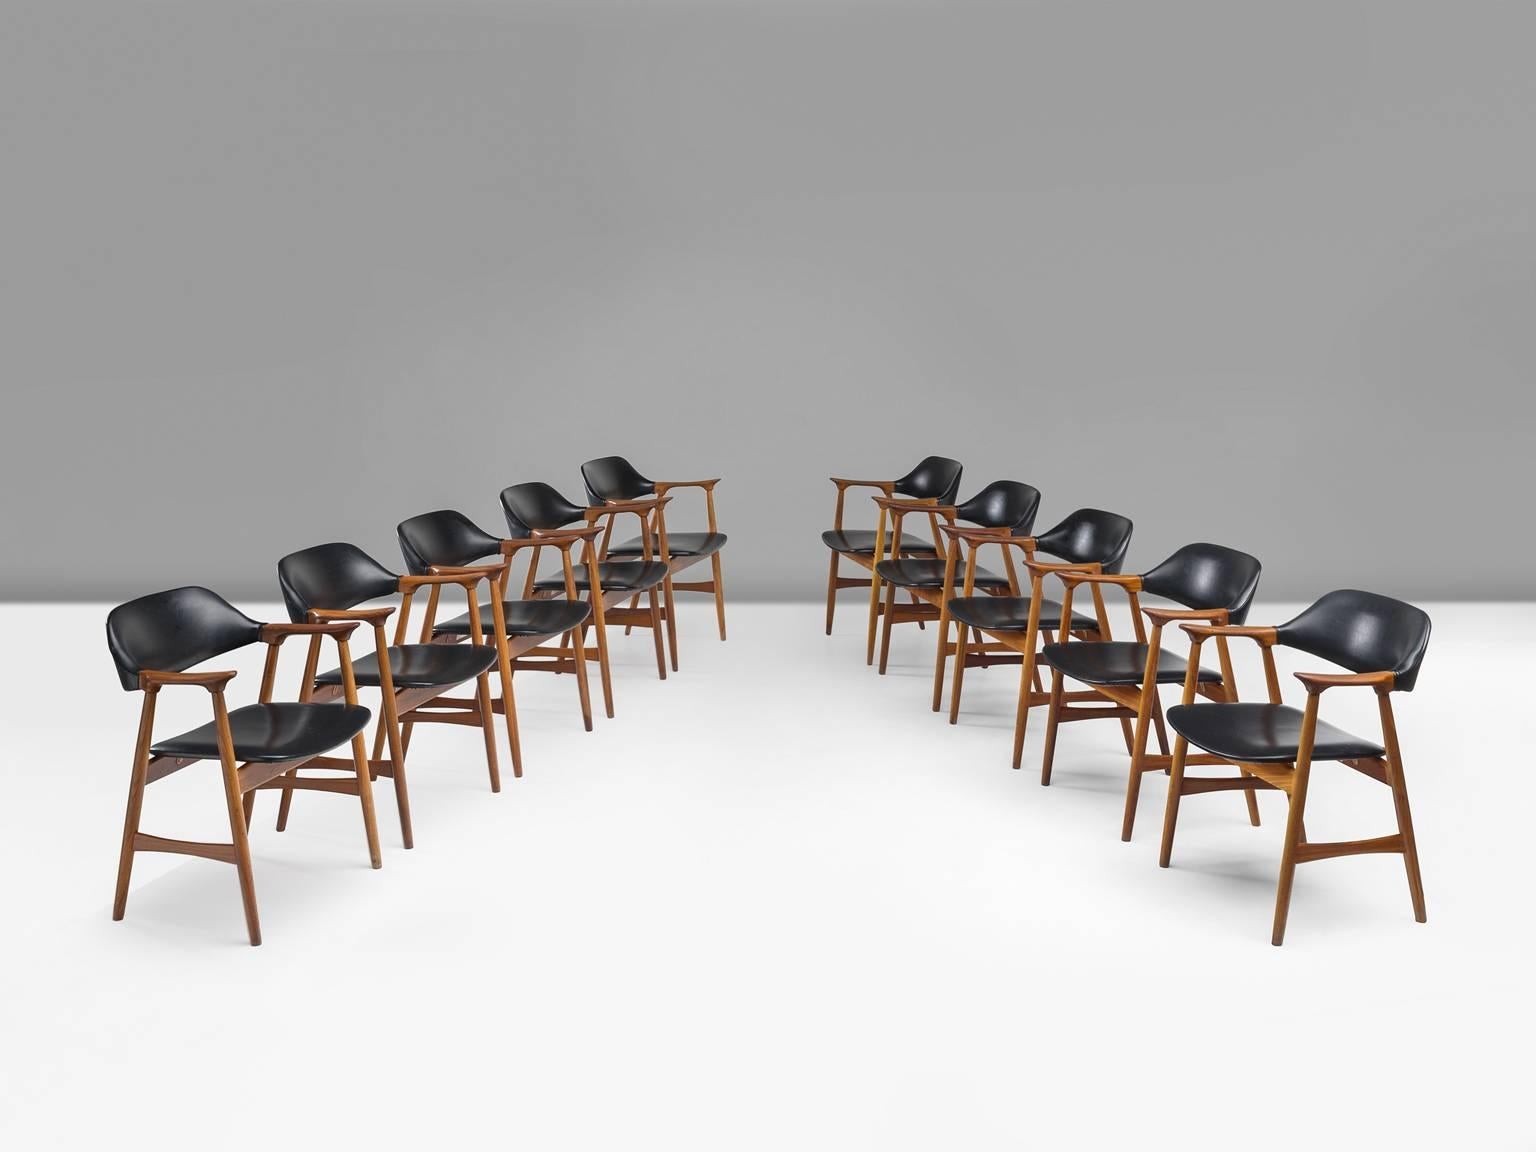 Set of ten armchairs, in teak and leatherette, Denmark, early 1950s. 

Very comfortable dining chairs, due to well-shaped armrests and ergonomic proportions of the back and seat. The sculptural back is very attractive, as the beautifully curved